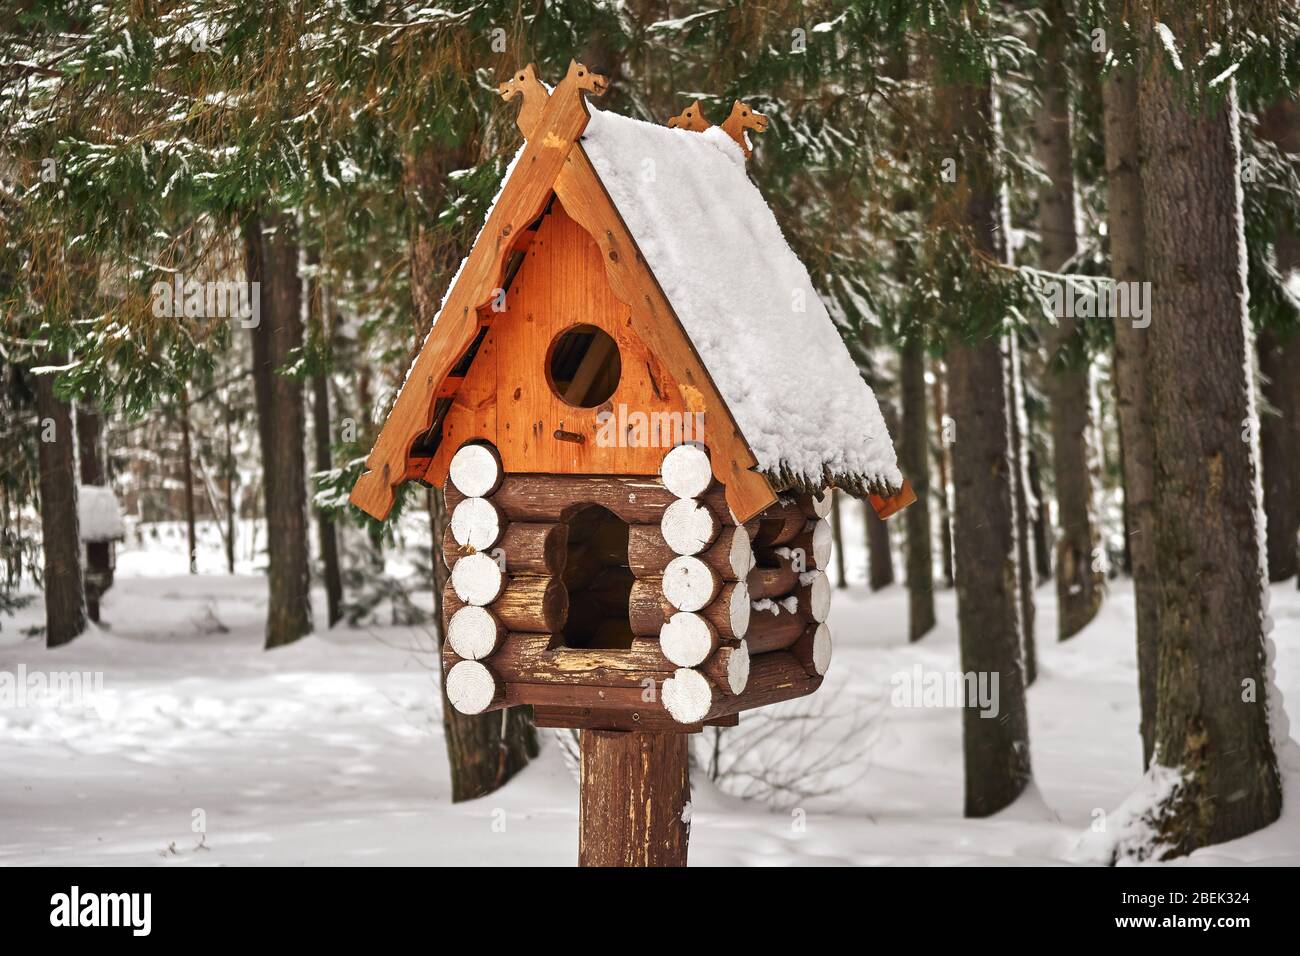 Wooden birdhouse. Handcrafted log cabin birdhouse in snowy forest Stock Photo